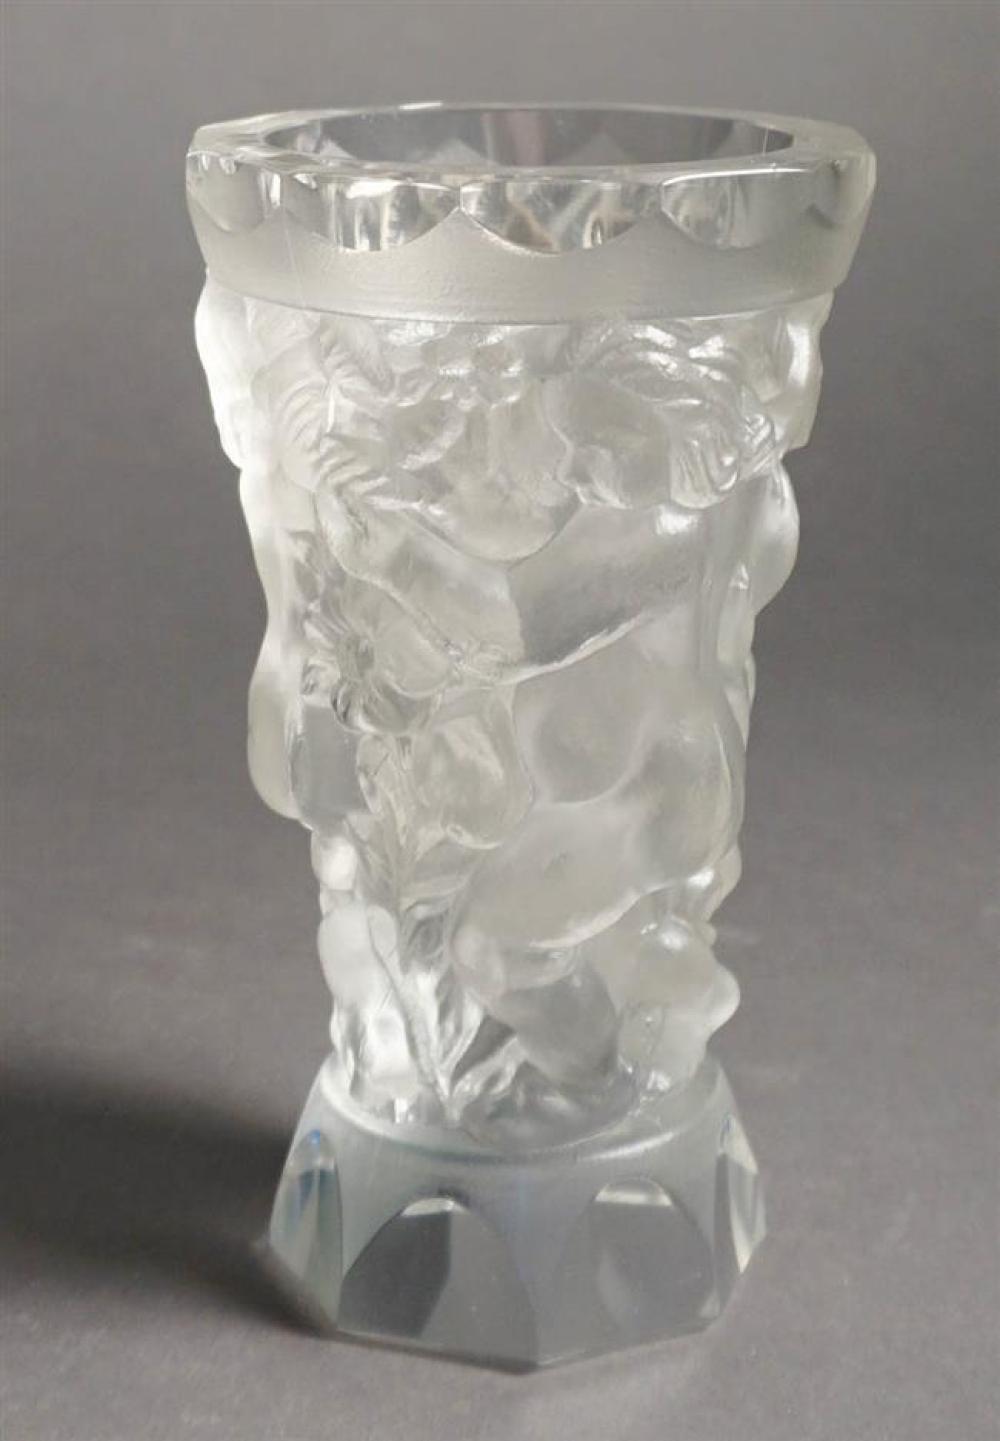 WEIL GLASS CO FROSTED CRYSTAL VASE